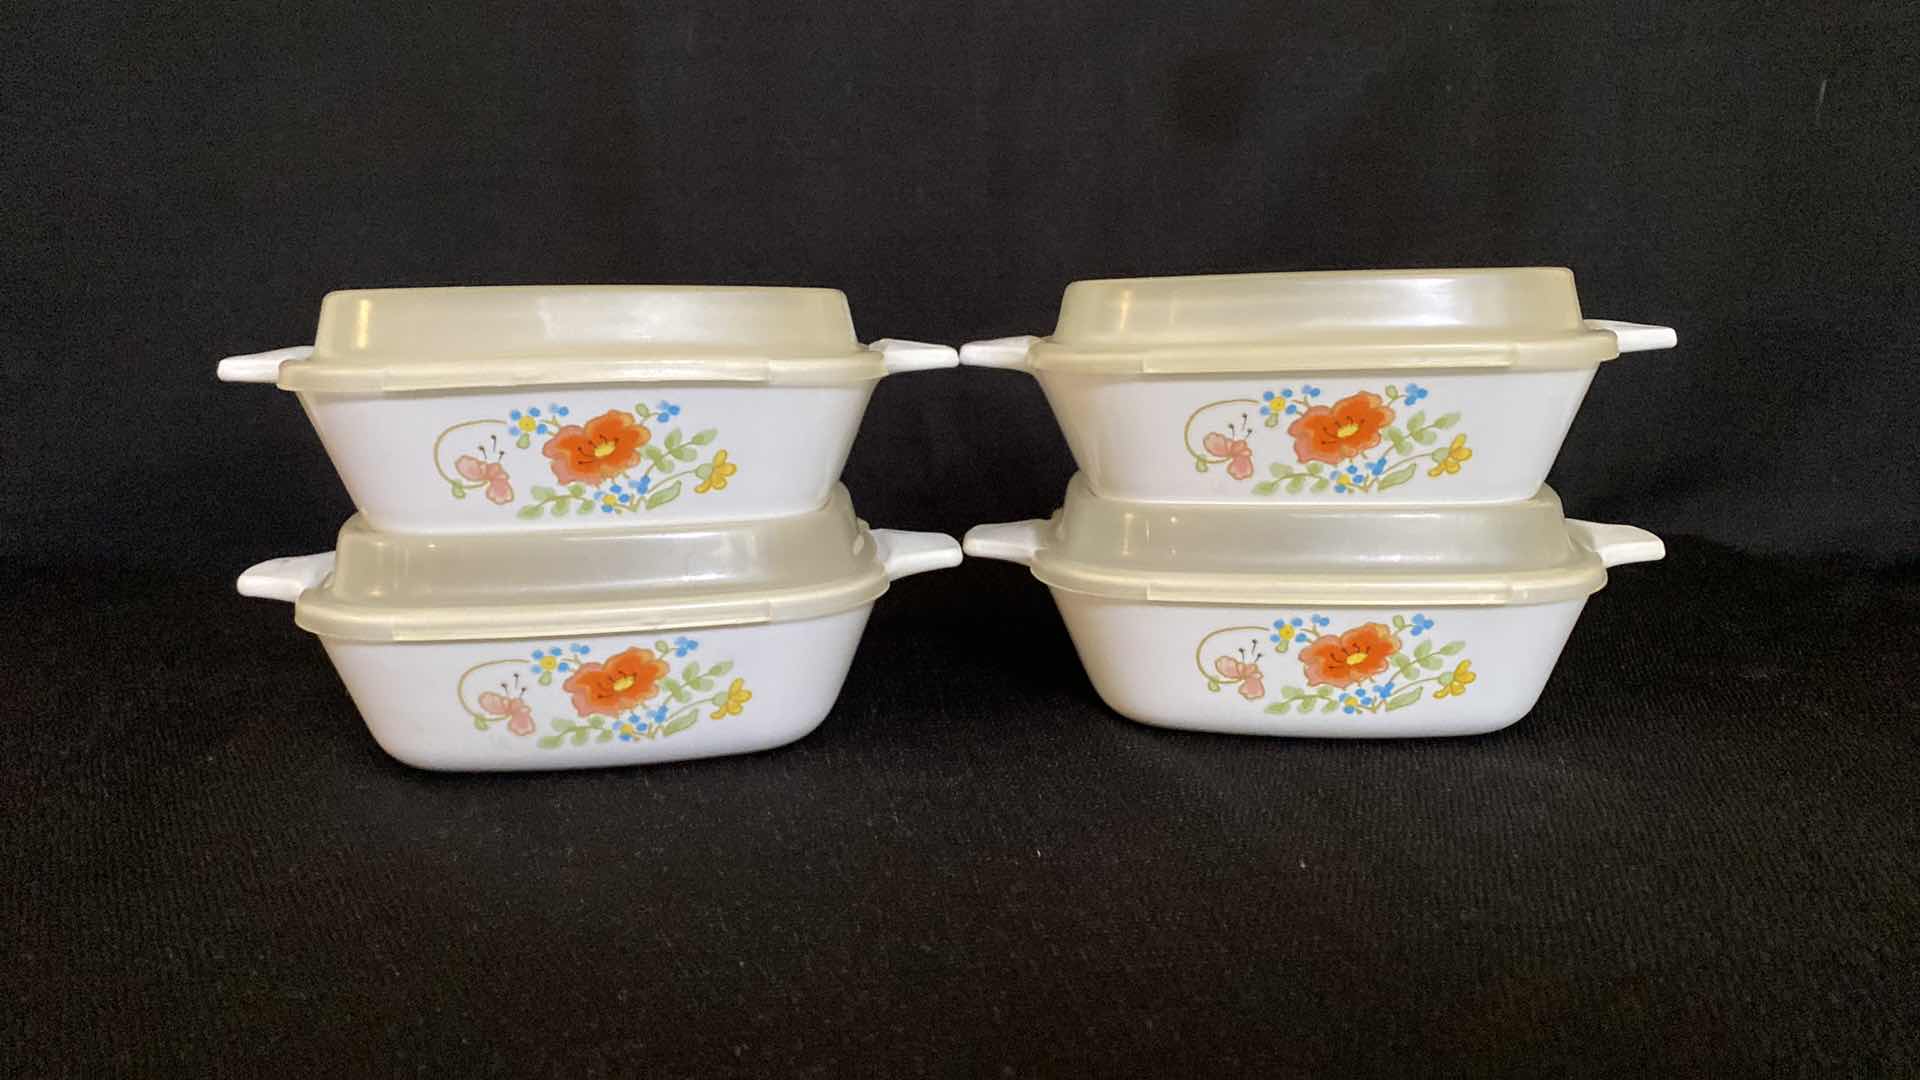 Photo 2 of 4 CORNING WARE WILDFLOWER BAKING DISHES WITH LIDS